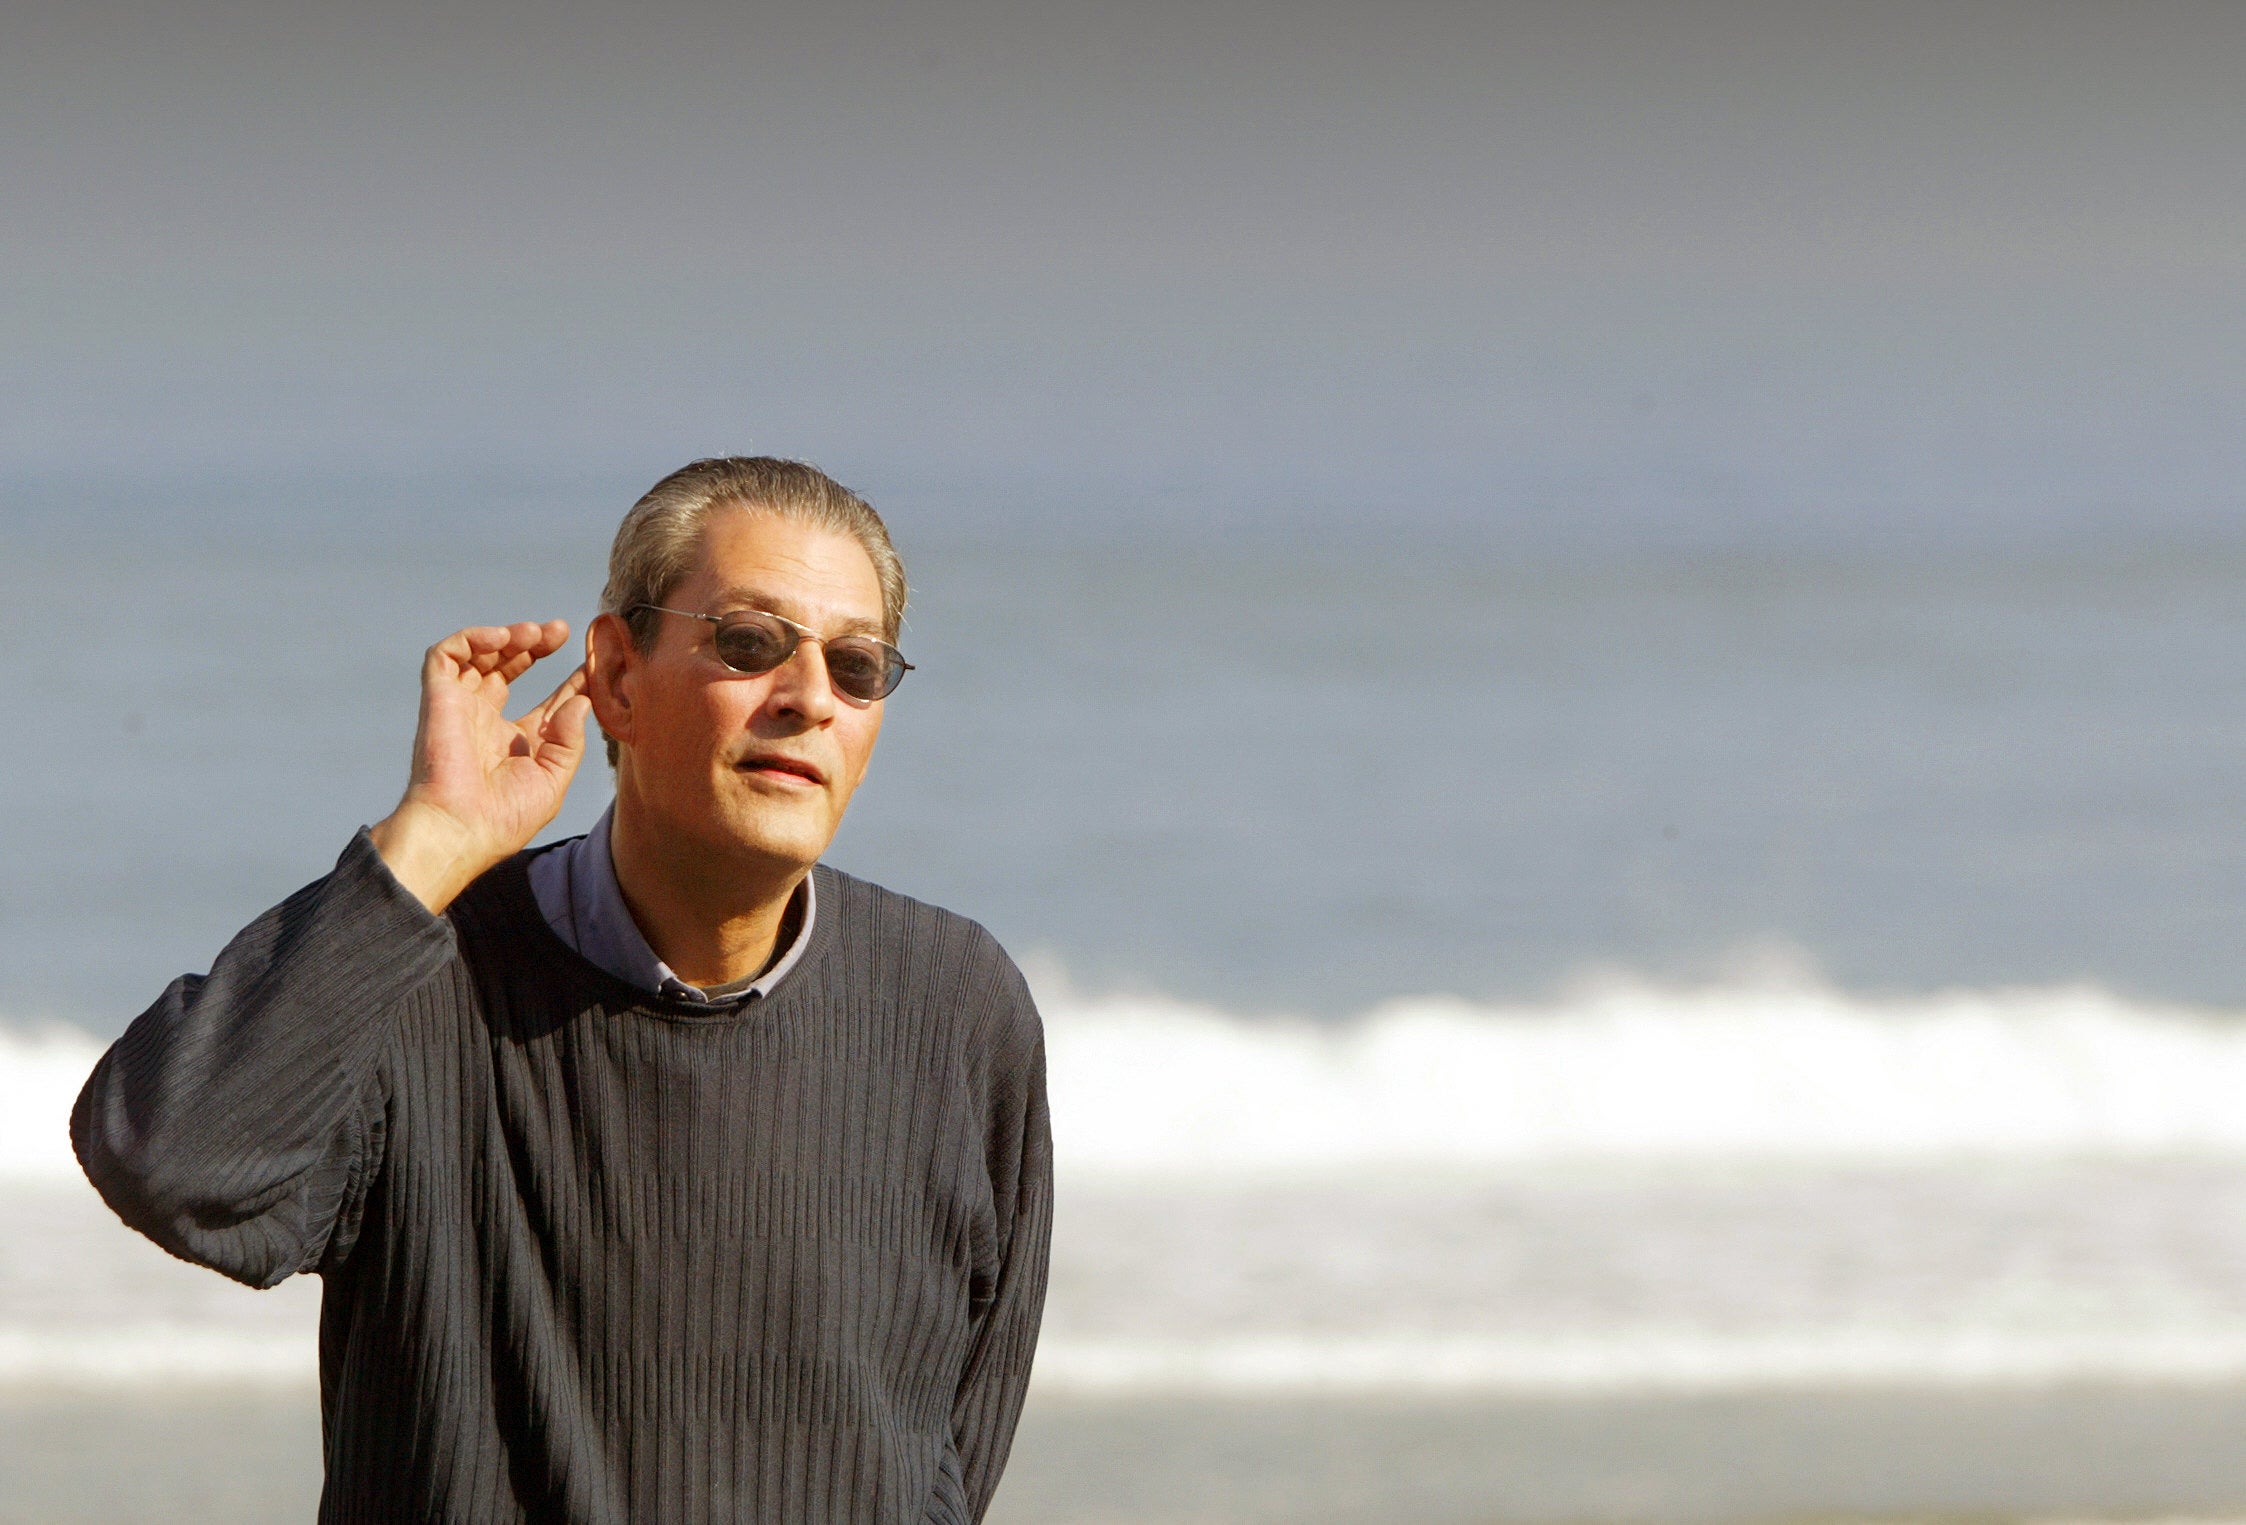 Paul Auster, the author of ‘The New York Trilogy’ and ‘Moon Palace’, has died aged 77